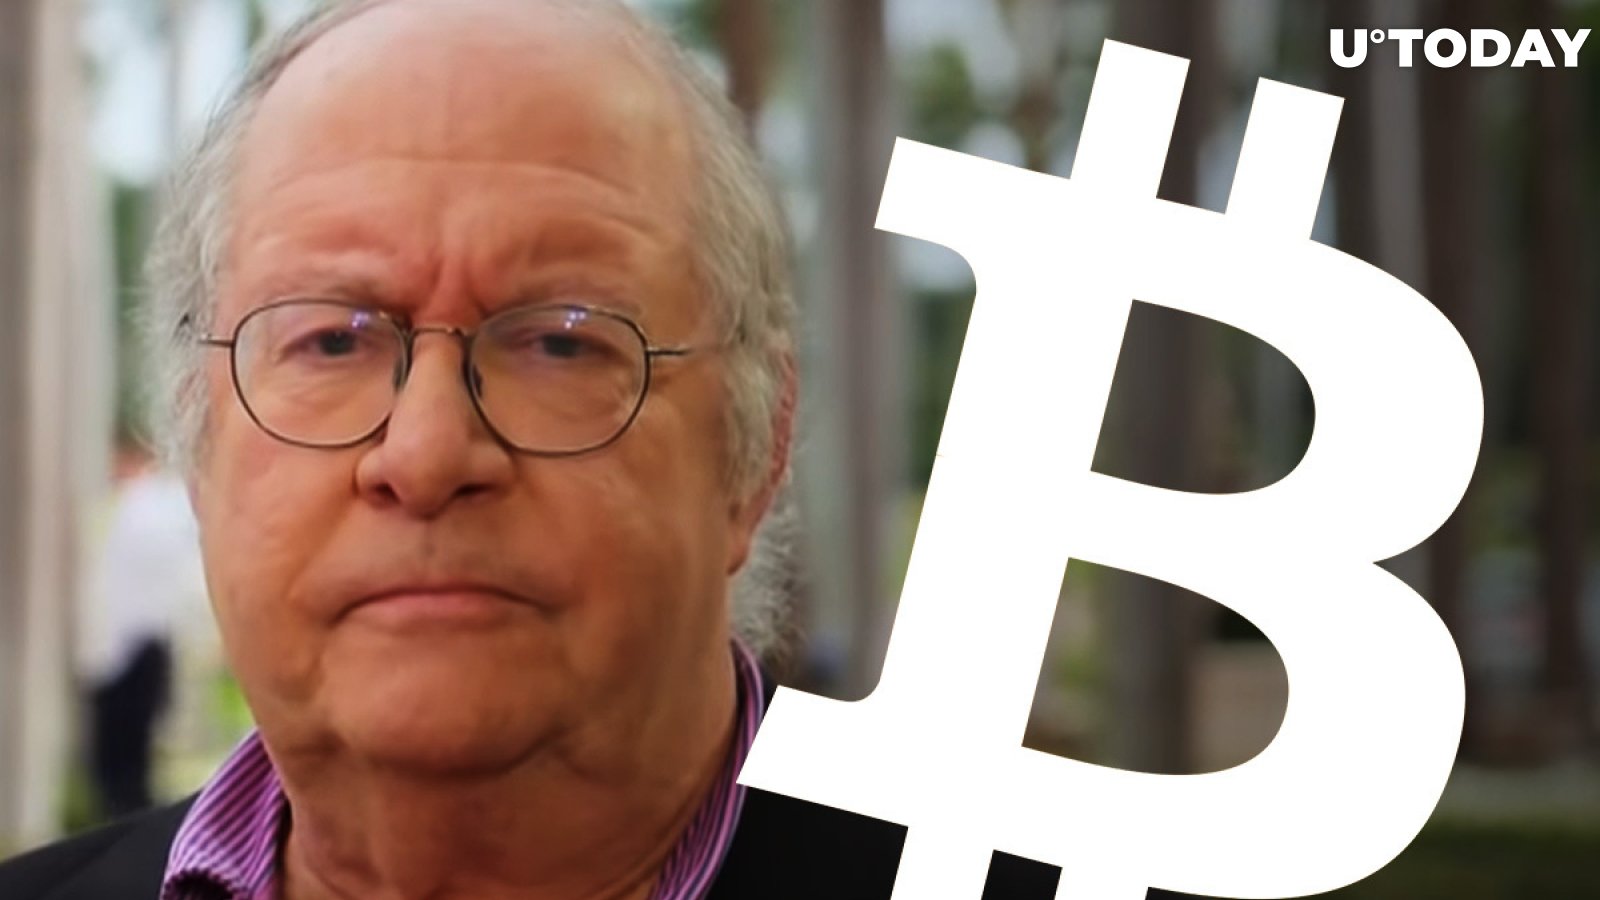 Legendary Investor Bill Miller Believes the Use of Bitcoin as a Store of Value "Remains Open"